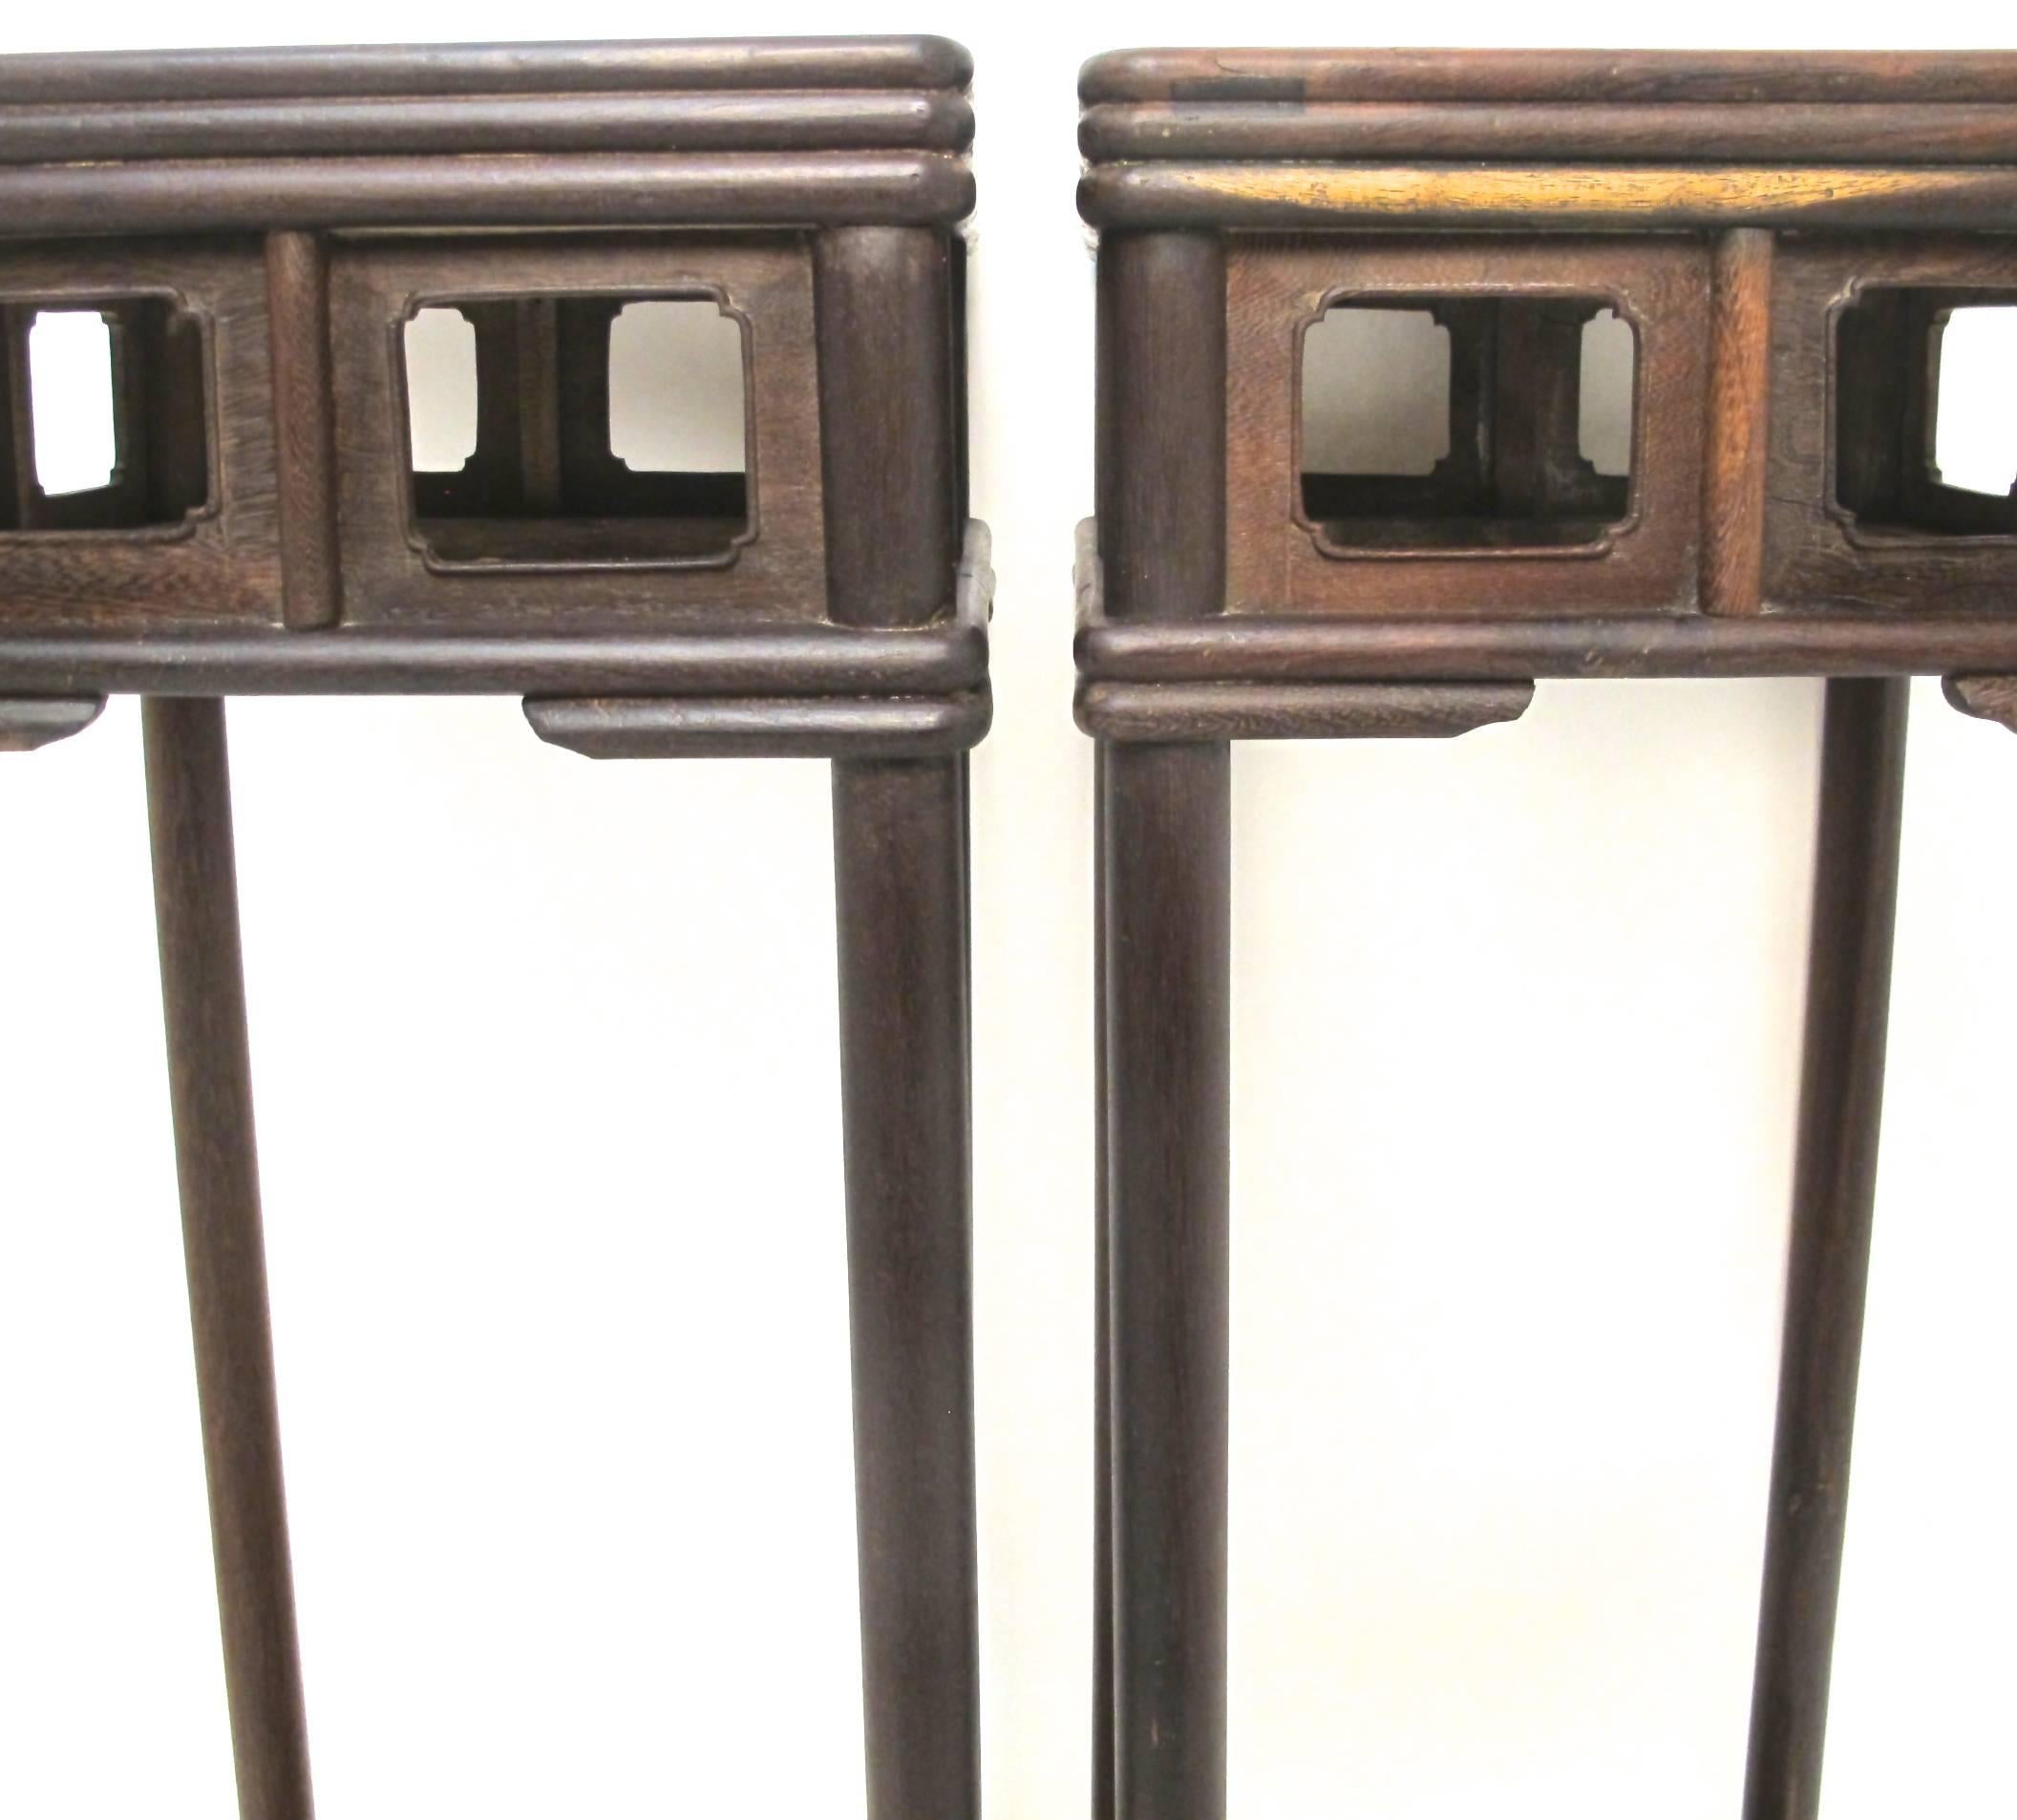 Superb pair of Jichimu (chicken wing wood) pedestals or stands with triple bull nose edge around the top and an open panel apron supported on solid round legs leading down to open fret work lower shelf, Chinese, circa 1880.
        